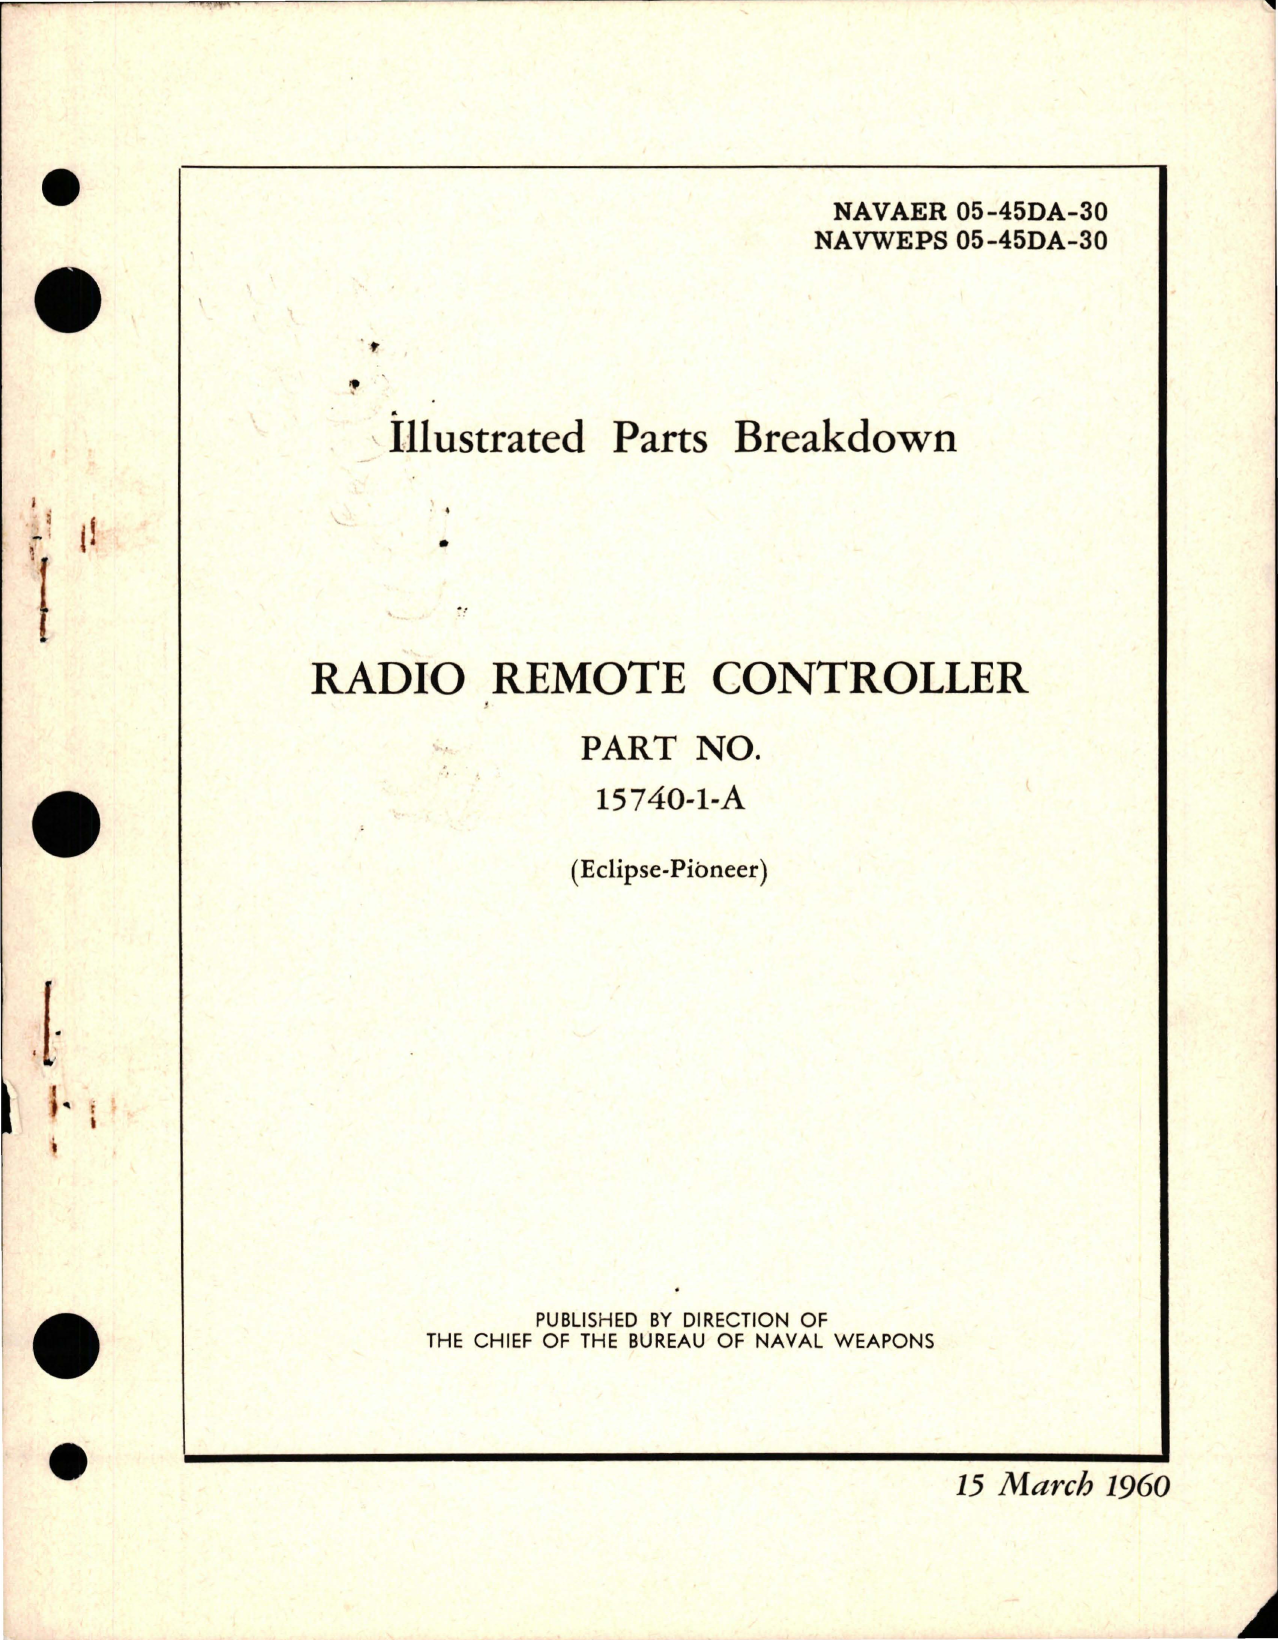 Sample page 1 from AirCorps Library document: Illustrated Parts Breakdown for Radio Remote Controller - Part 15740-1-A